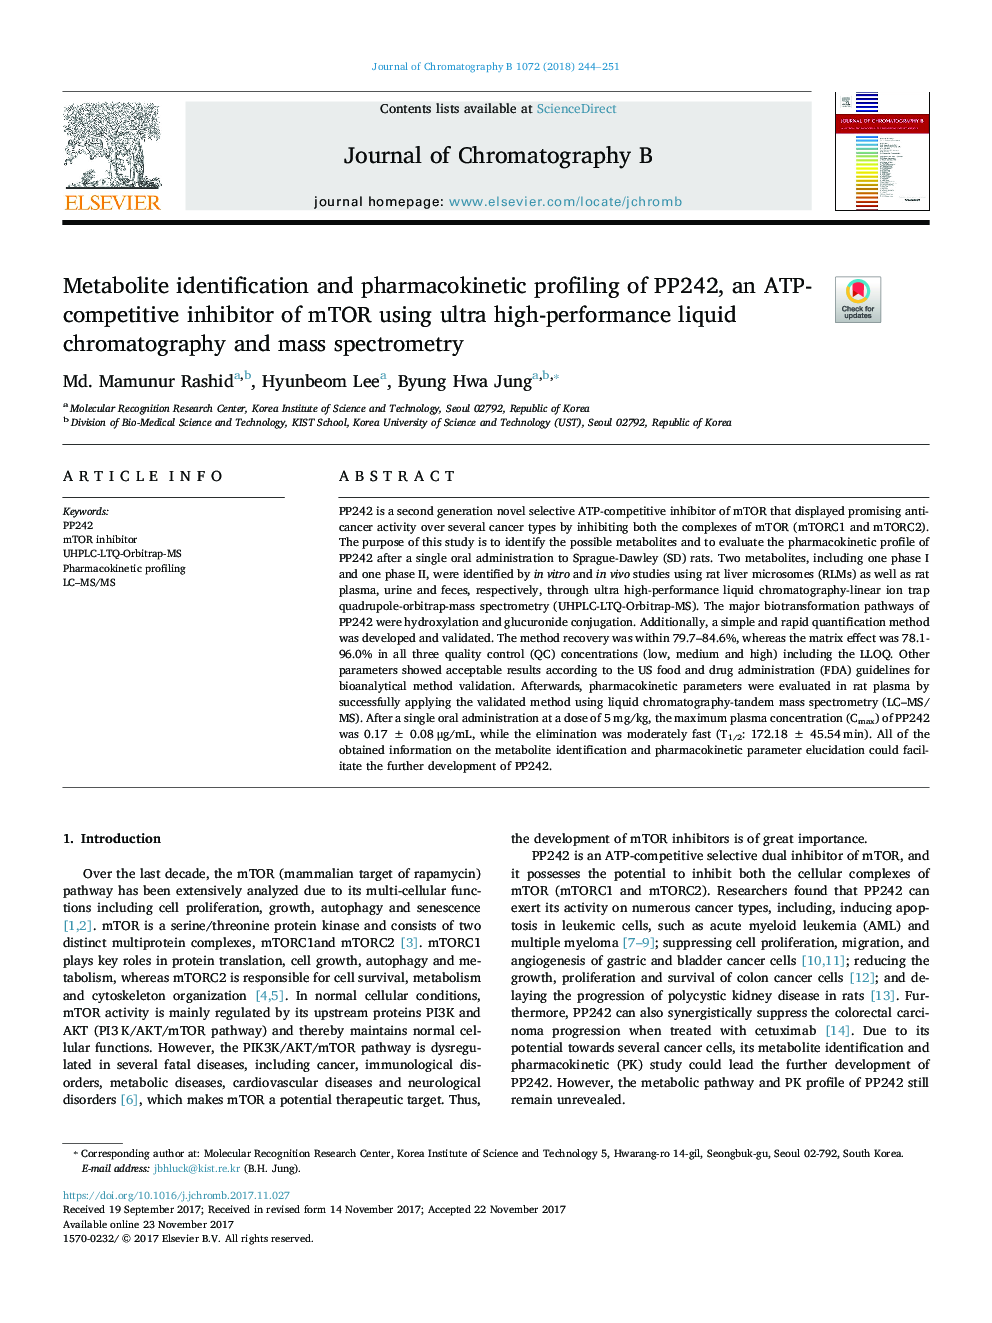 Metabolite identification and pharmacokinetic profiling of PP242, an ATP-competitive inhibitor of mTOR using ultra high-performance liquid chromatography and mass spectrometry